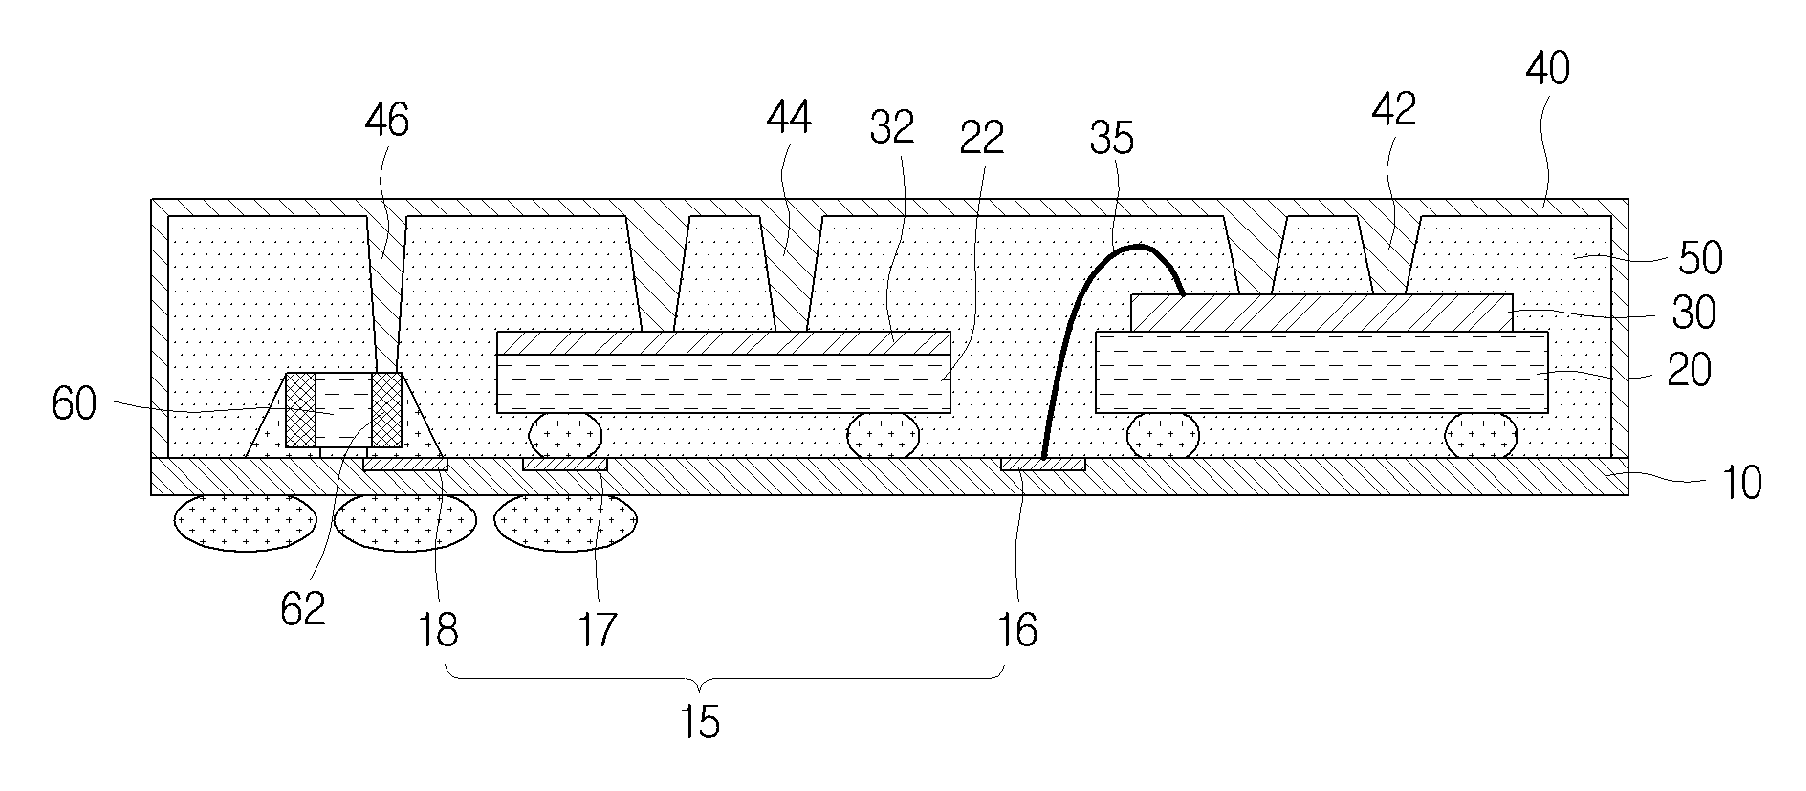 Semiconductor package and method of manufacturing the semiconductor package